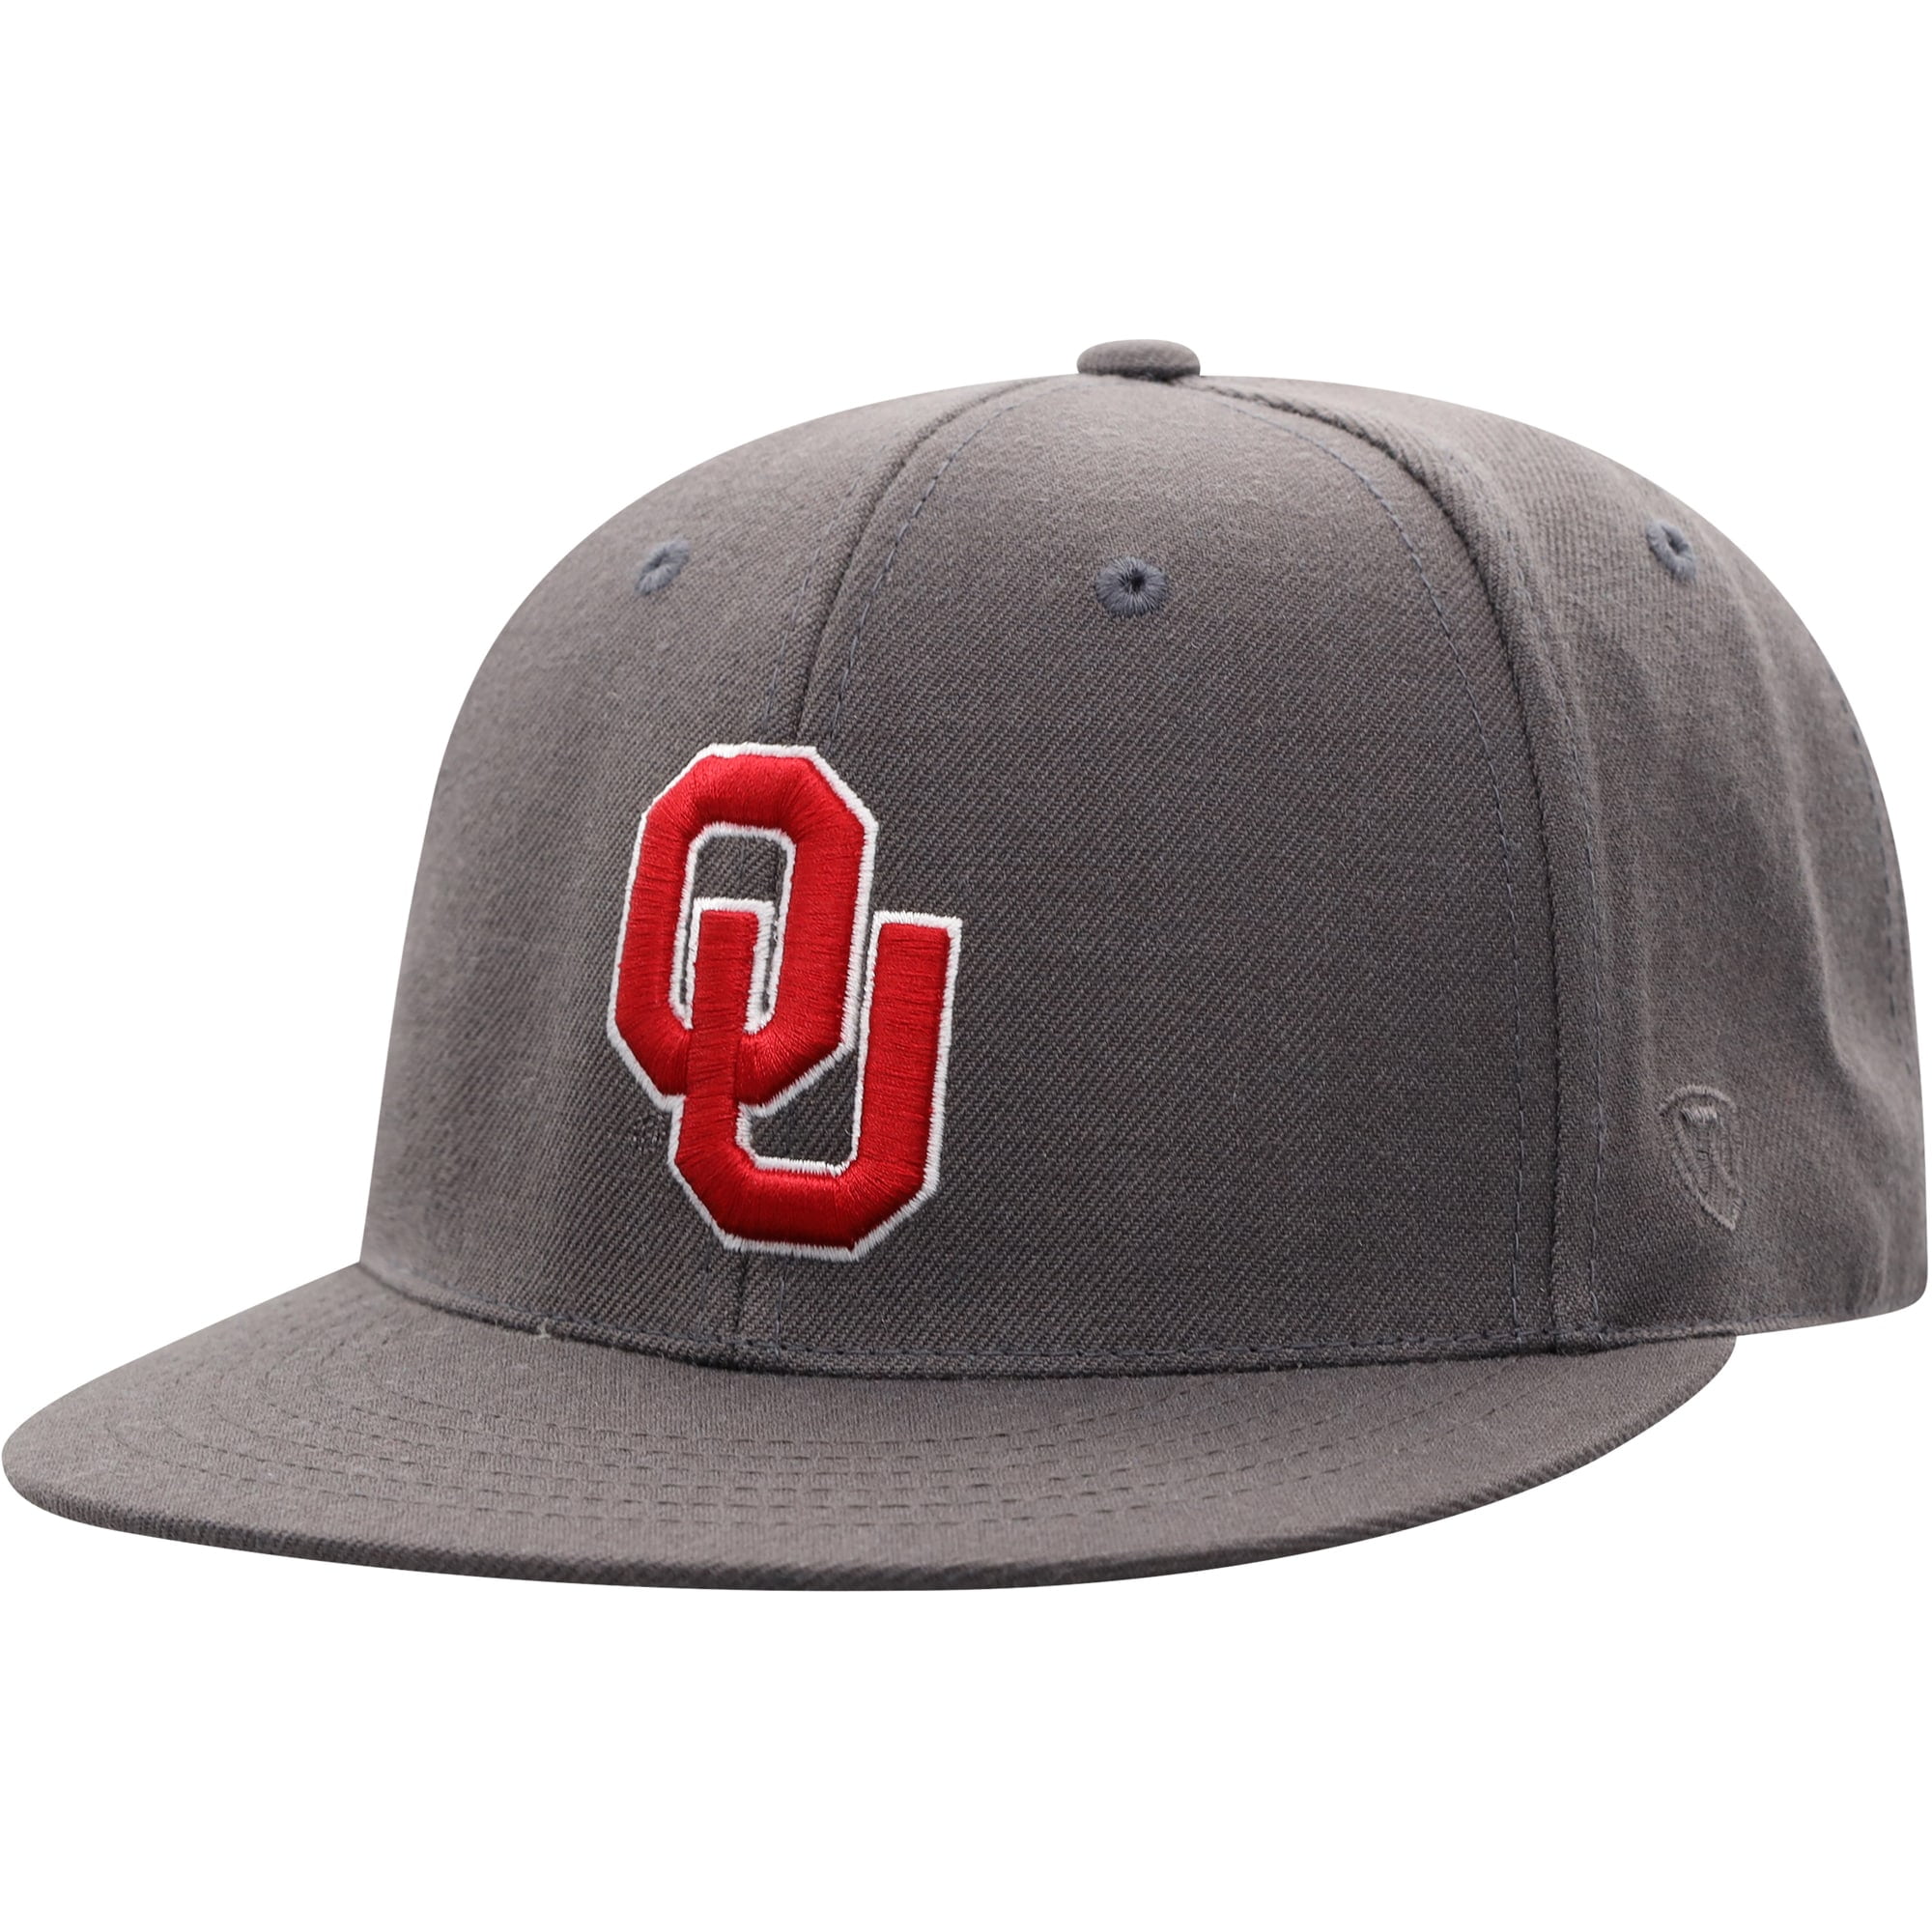 MESH US OKLAHOMA STATE THE SOONER STATE BALL CAP HAT GRAY NEW 